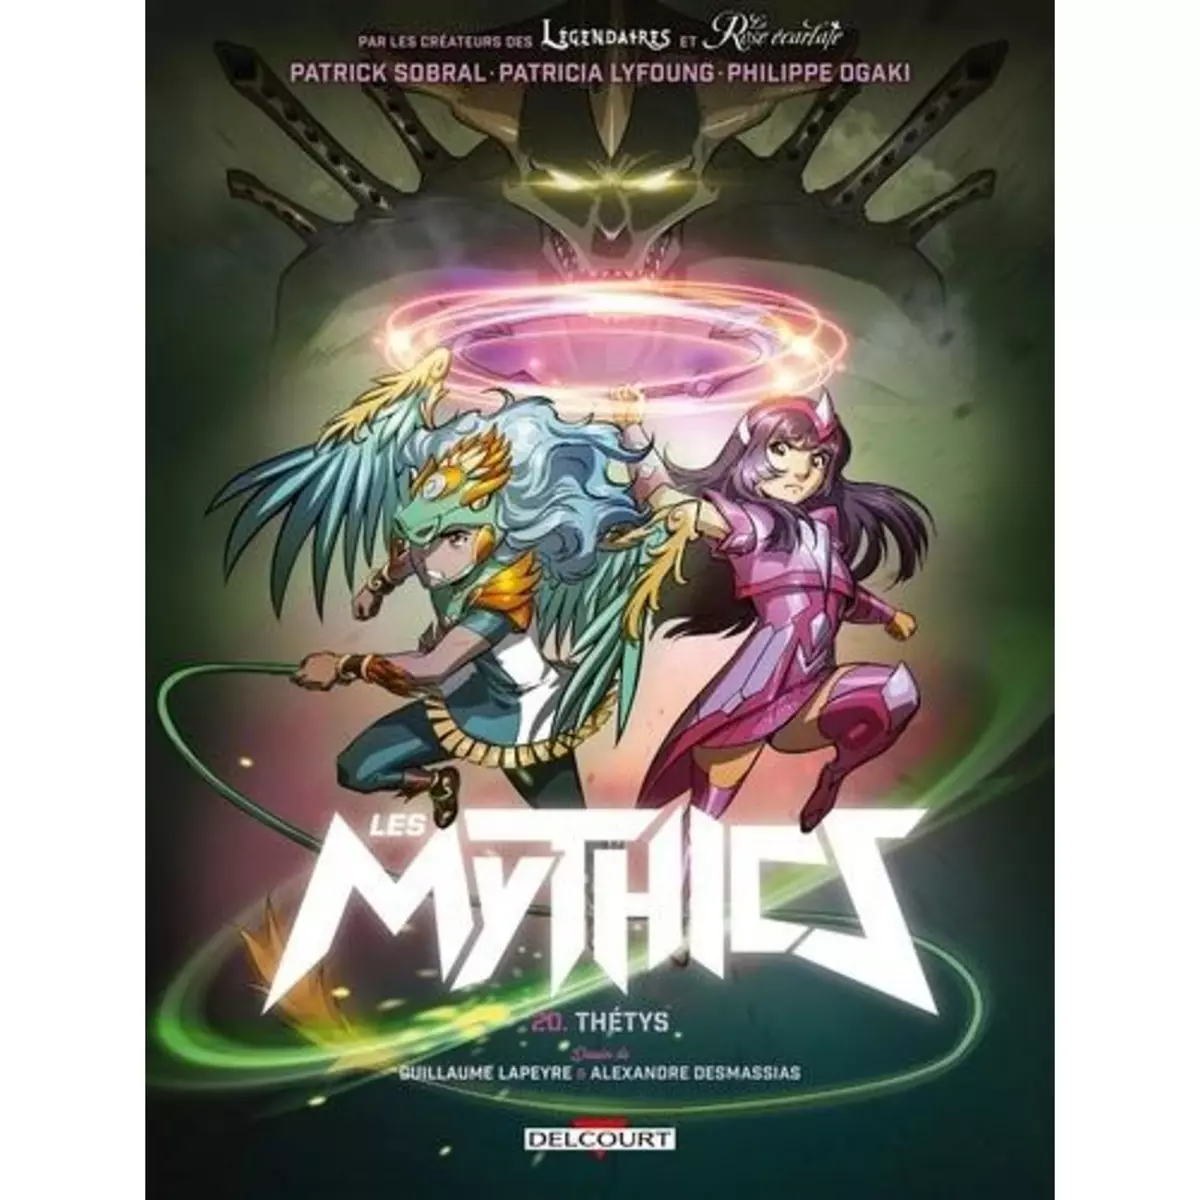  LES MYTHICS TOME 20 : THETYS, Sobral Patrick